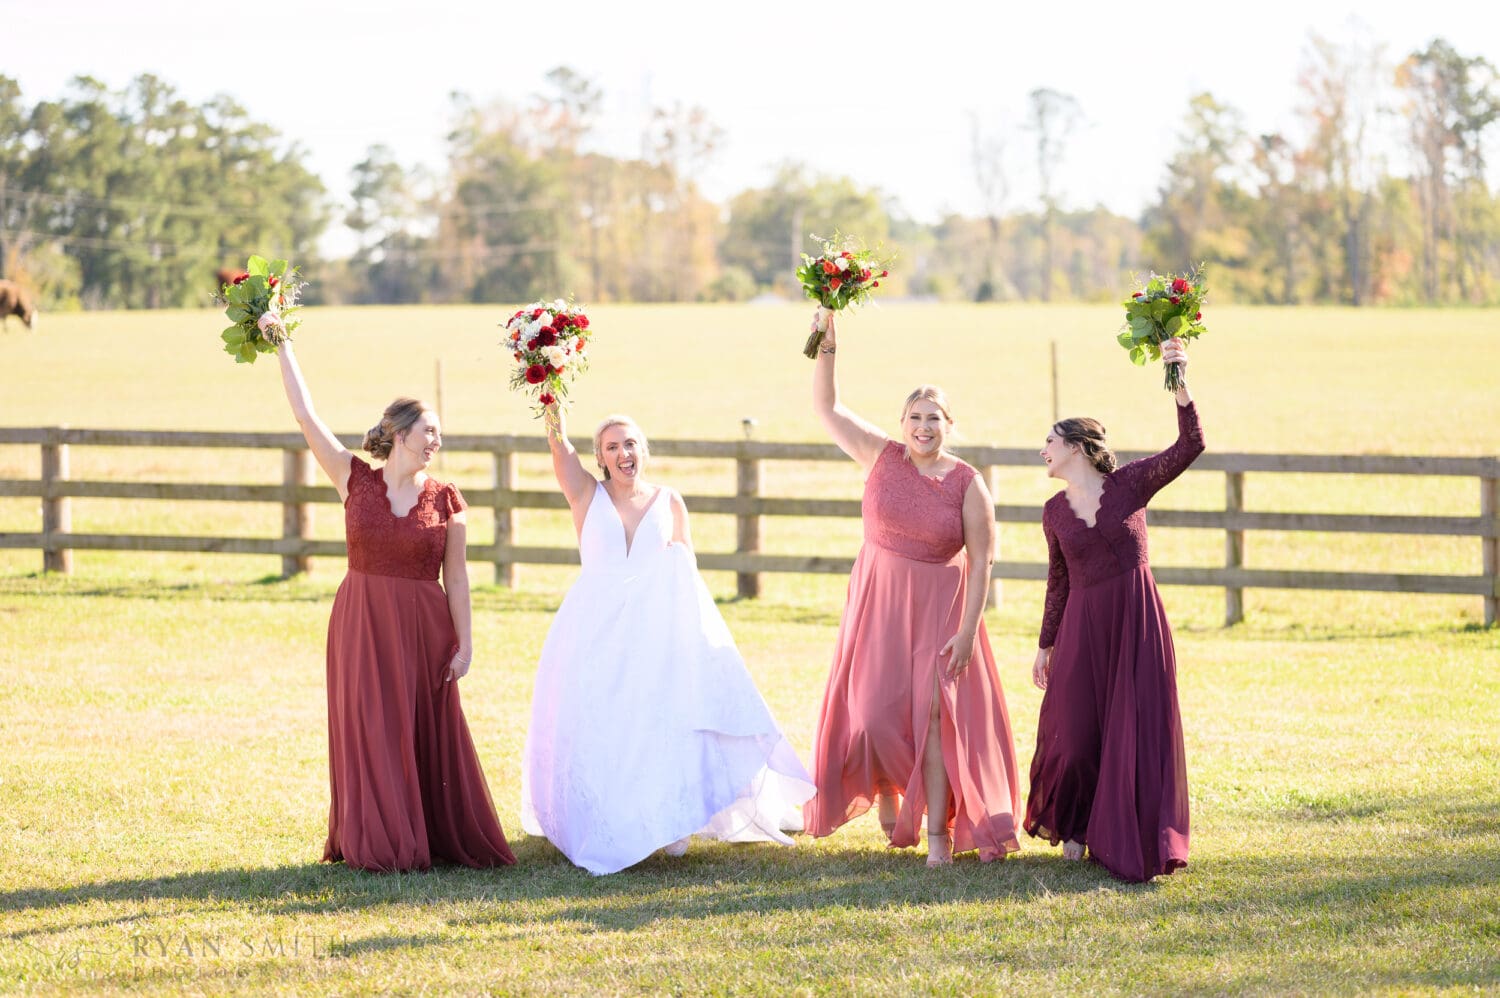 Bridesmaids walking together - The Blessed Barn